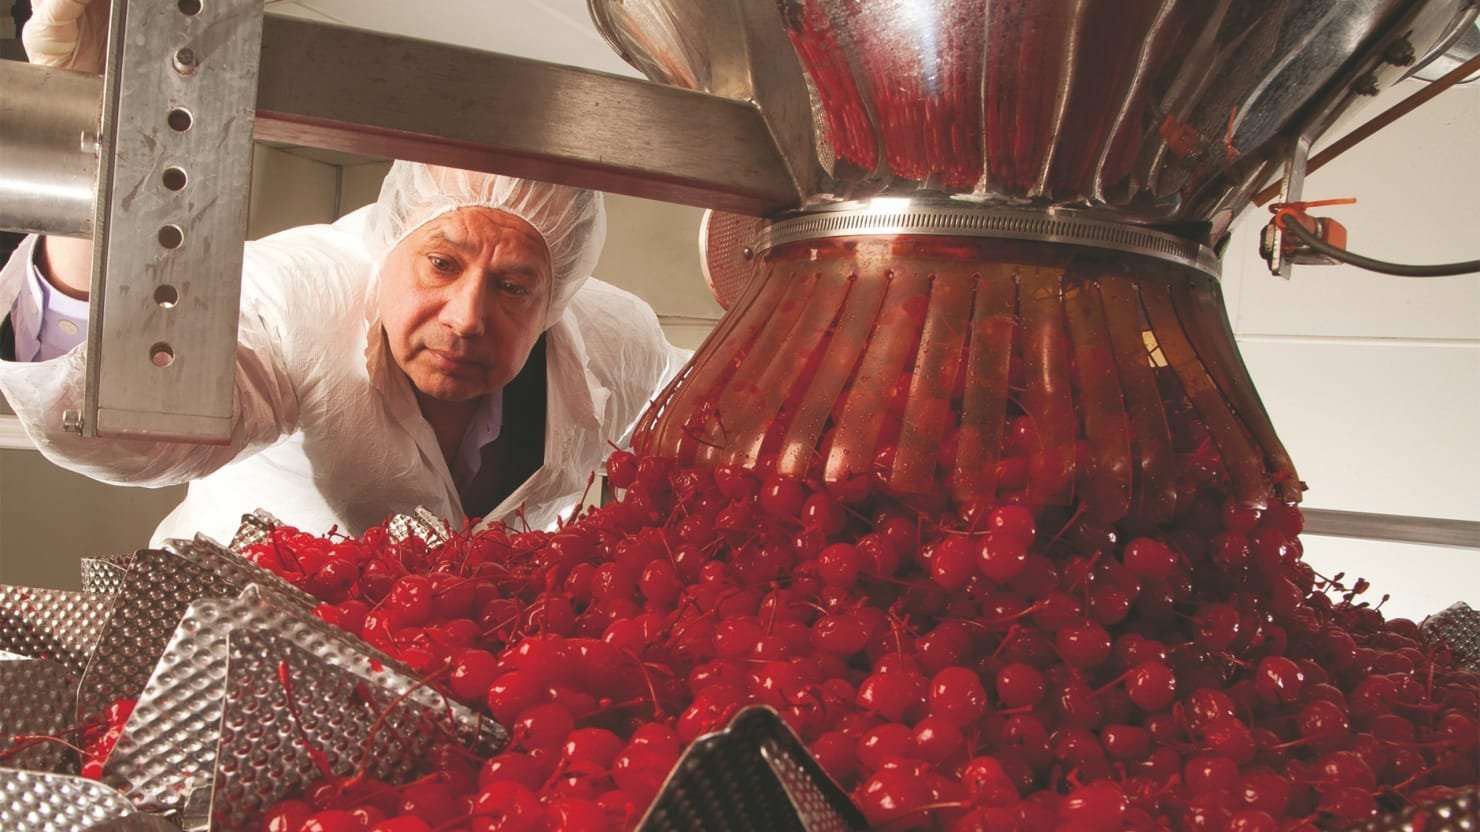 image for How Bees Revealed a Pot Farm Beneath the Maraschino Cherries